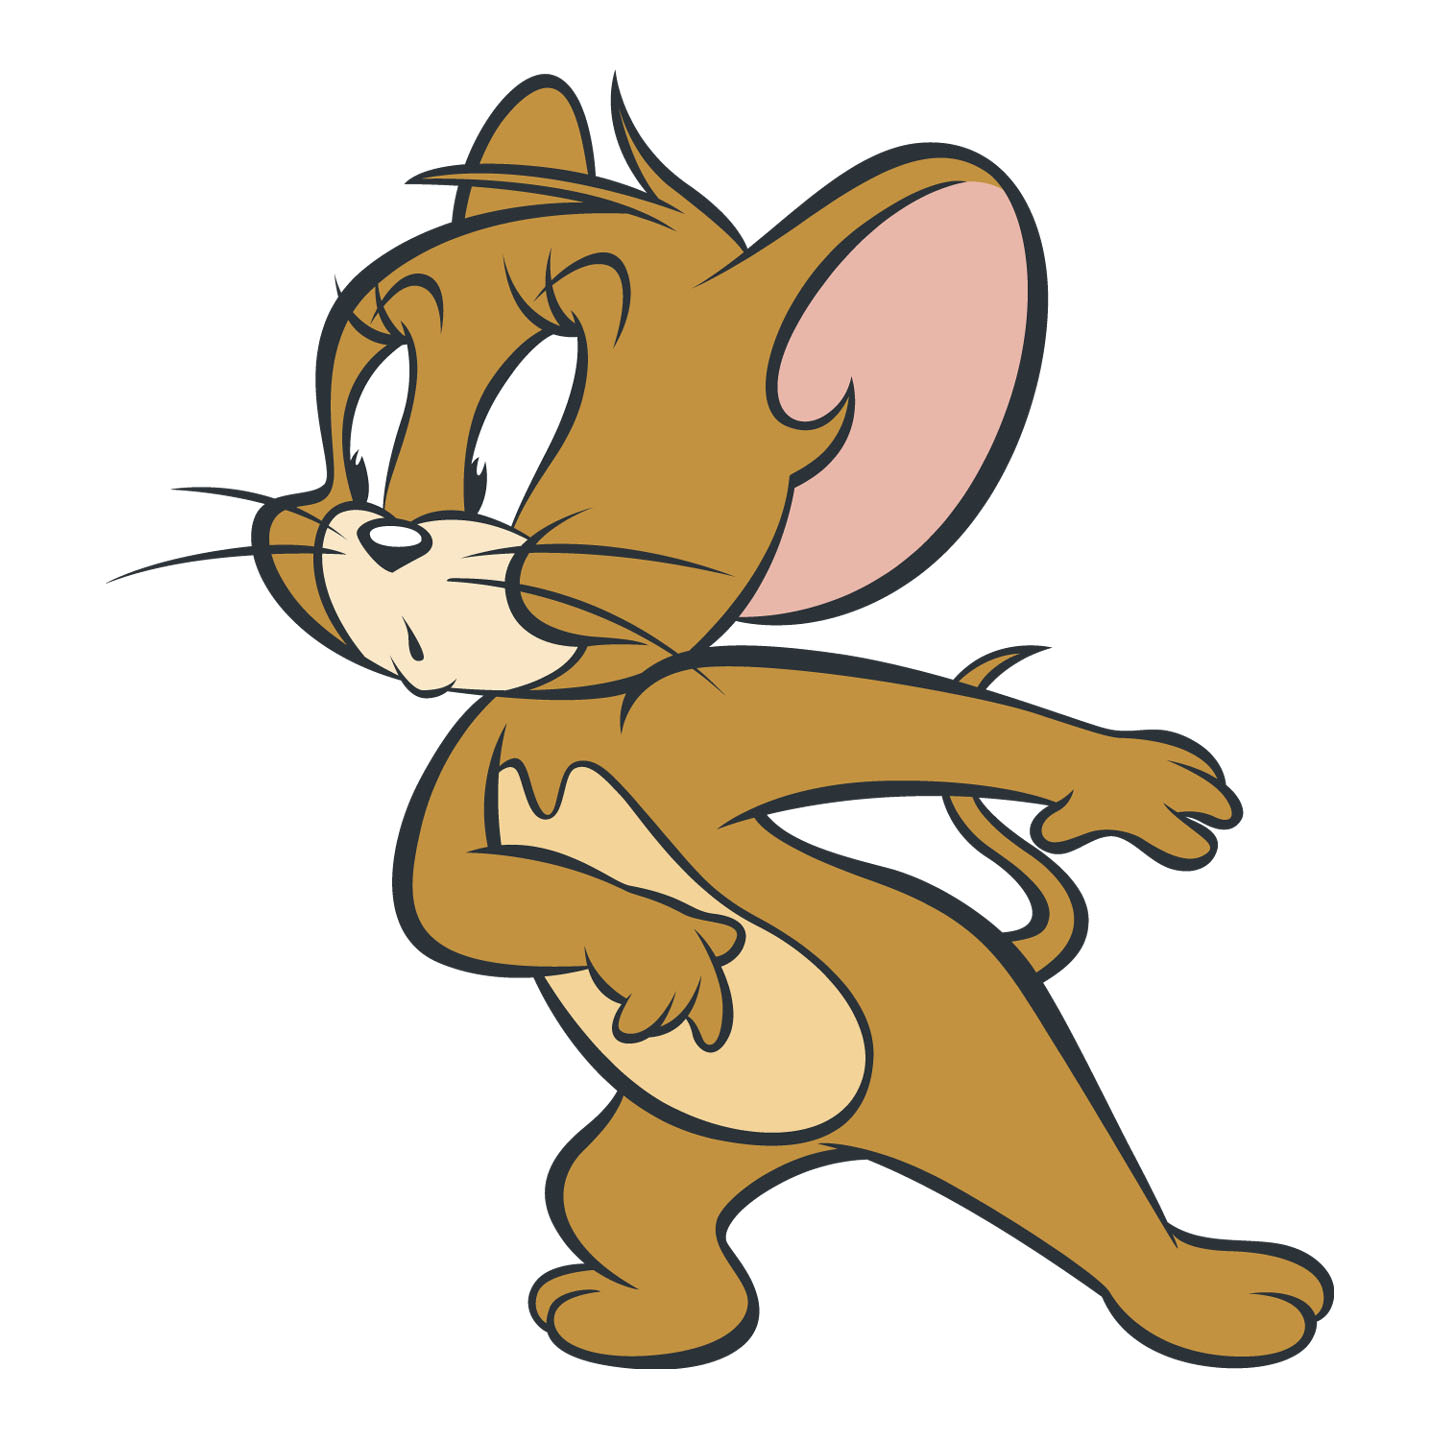 Jerry The Mouse 338 Hd Wallpapers in Cartoons - Imagesci.